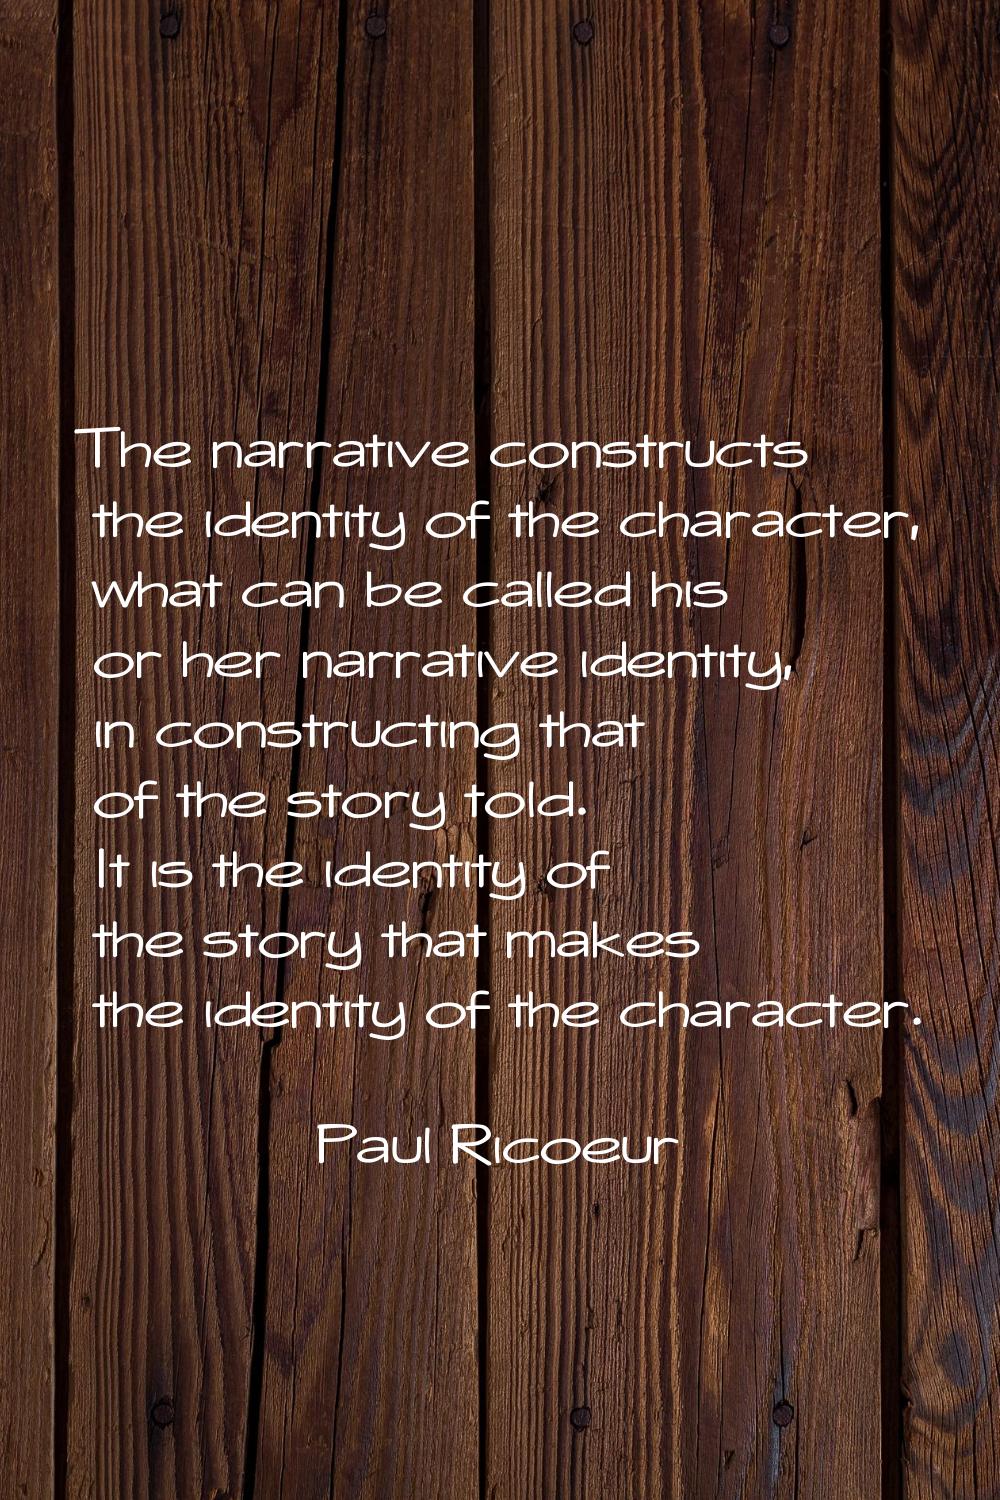 The narrative constructs the identity of the character, what can be called his or her narrative ide